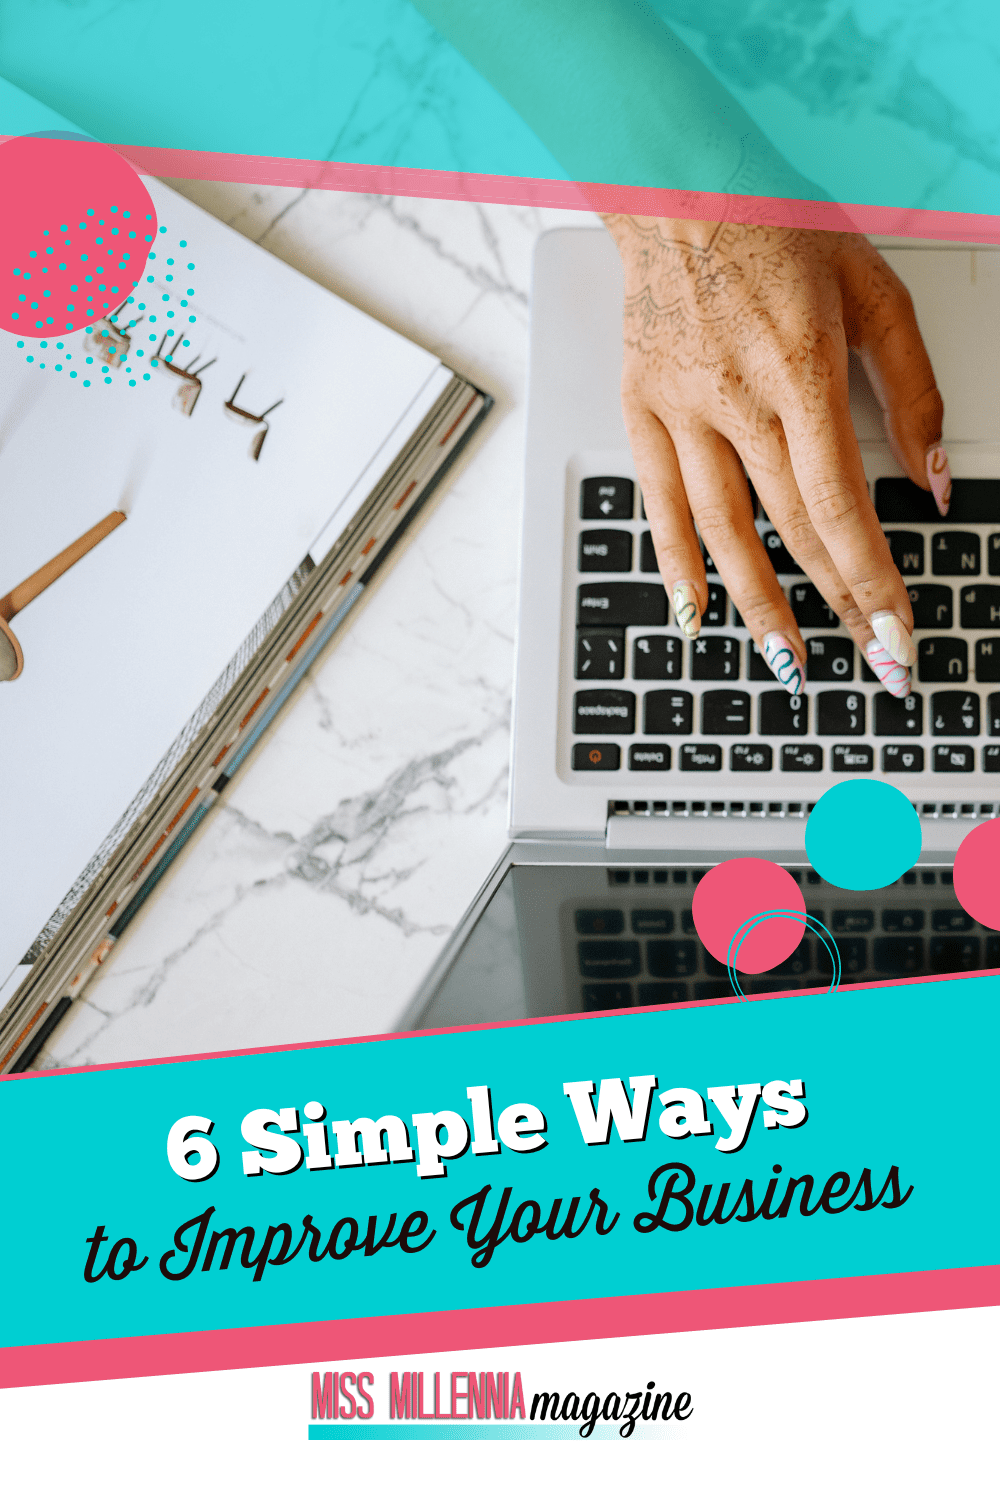 6 Simple Ways to Improve Your Business